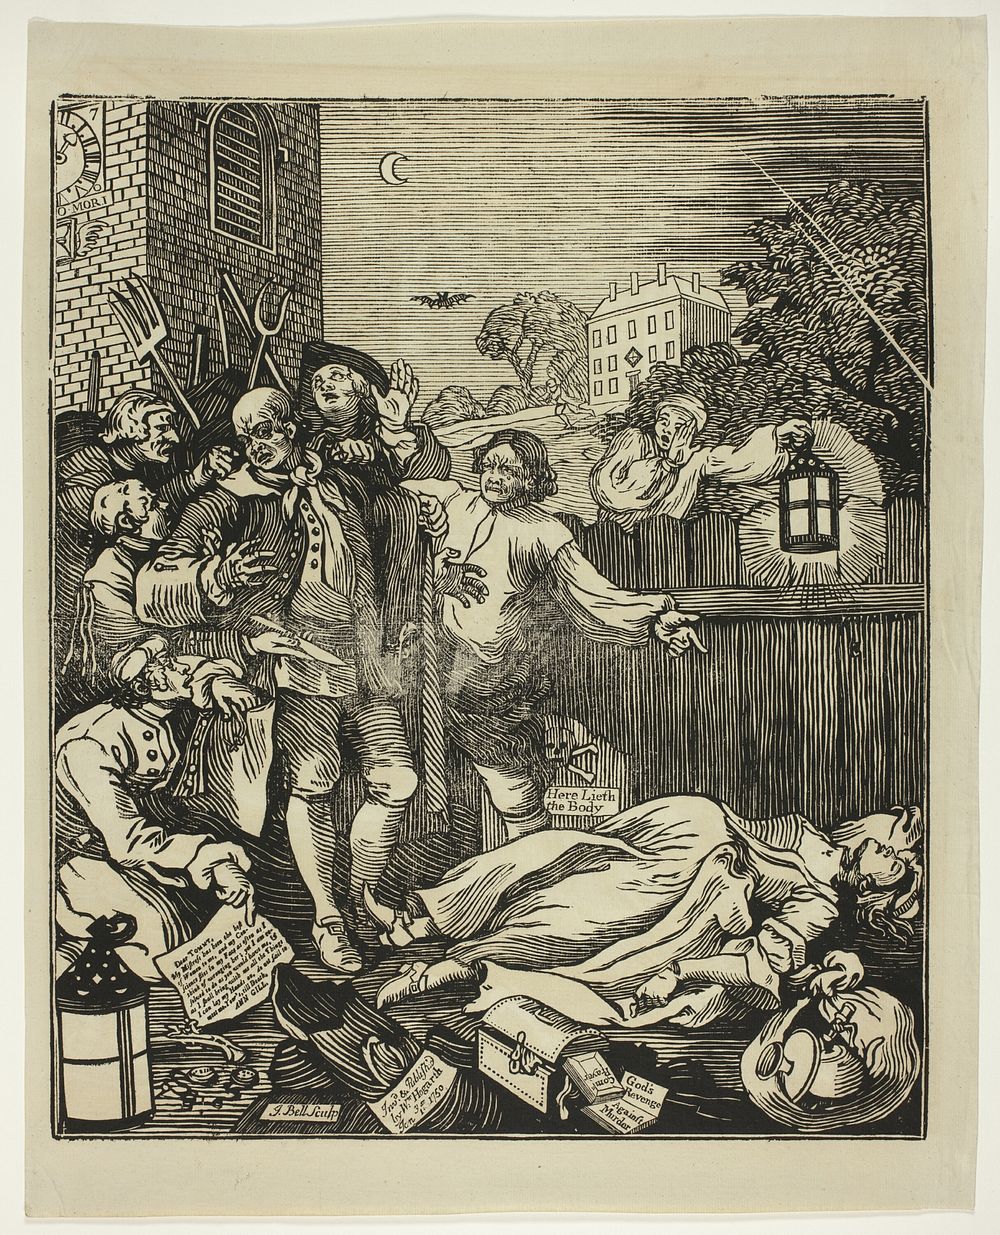 Cruelty in Perfection by William Hogarth